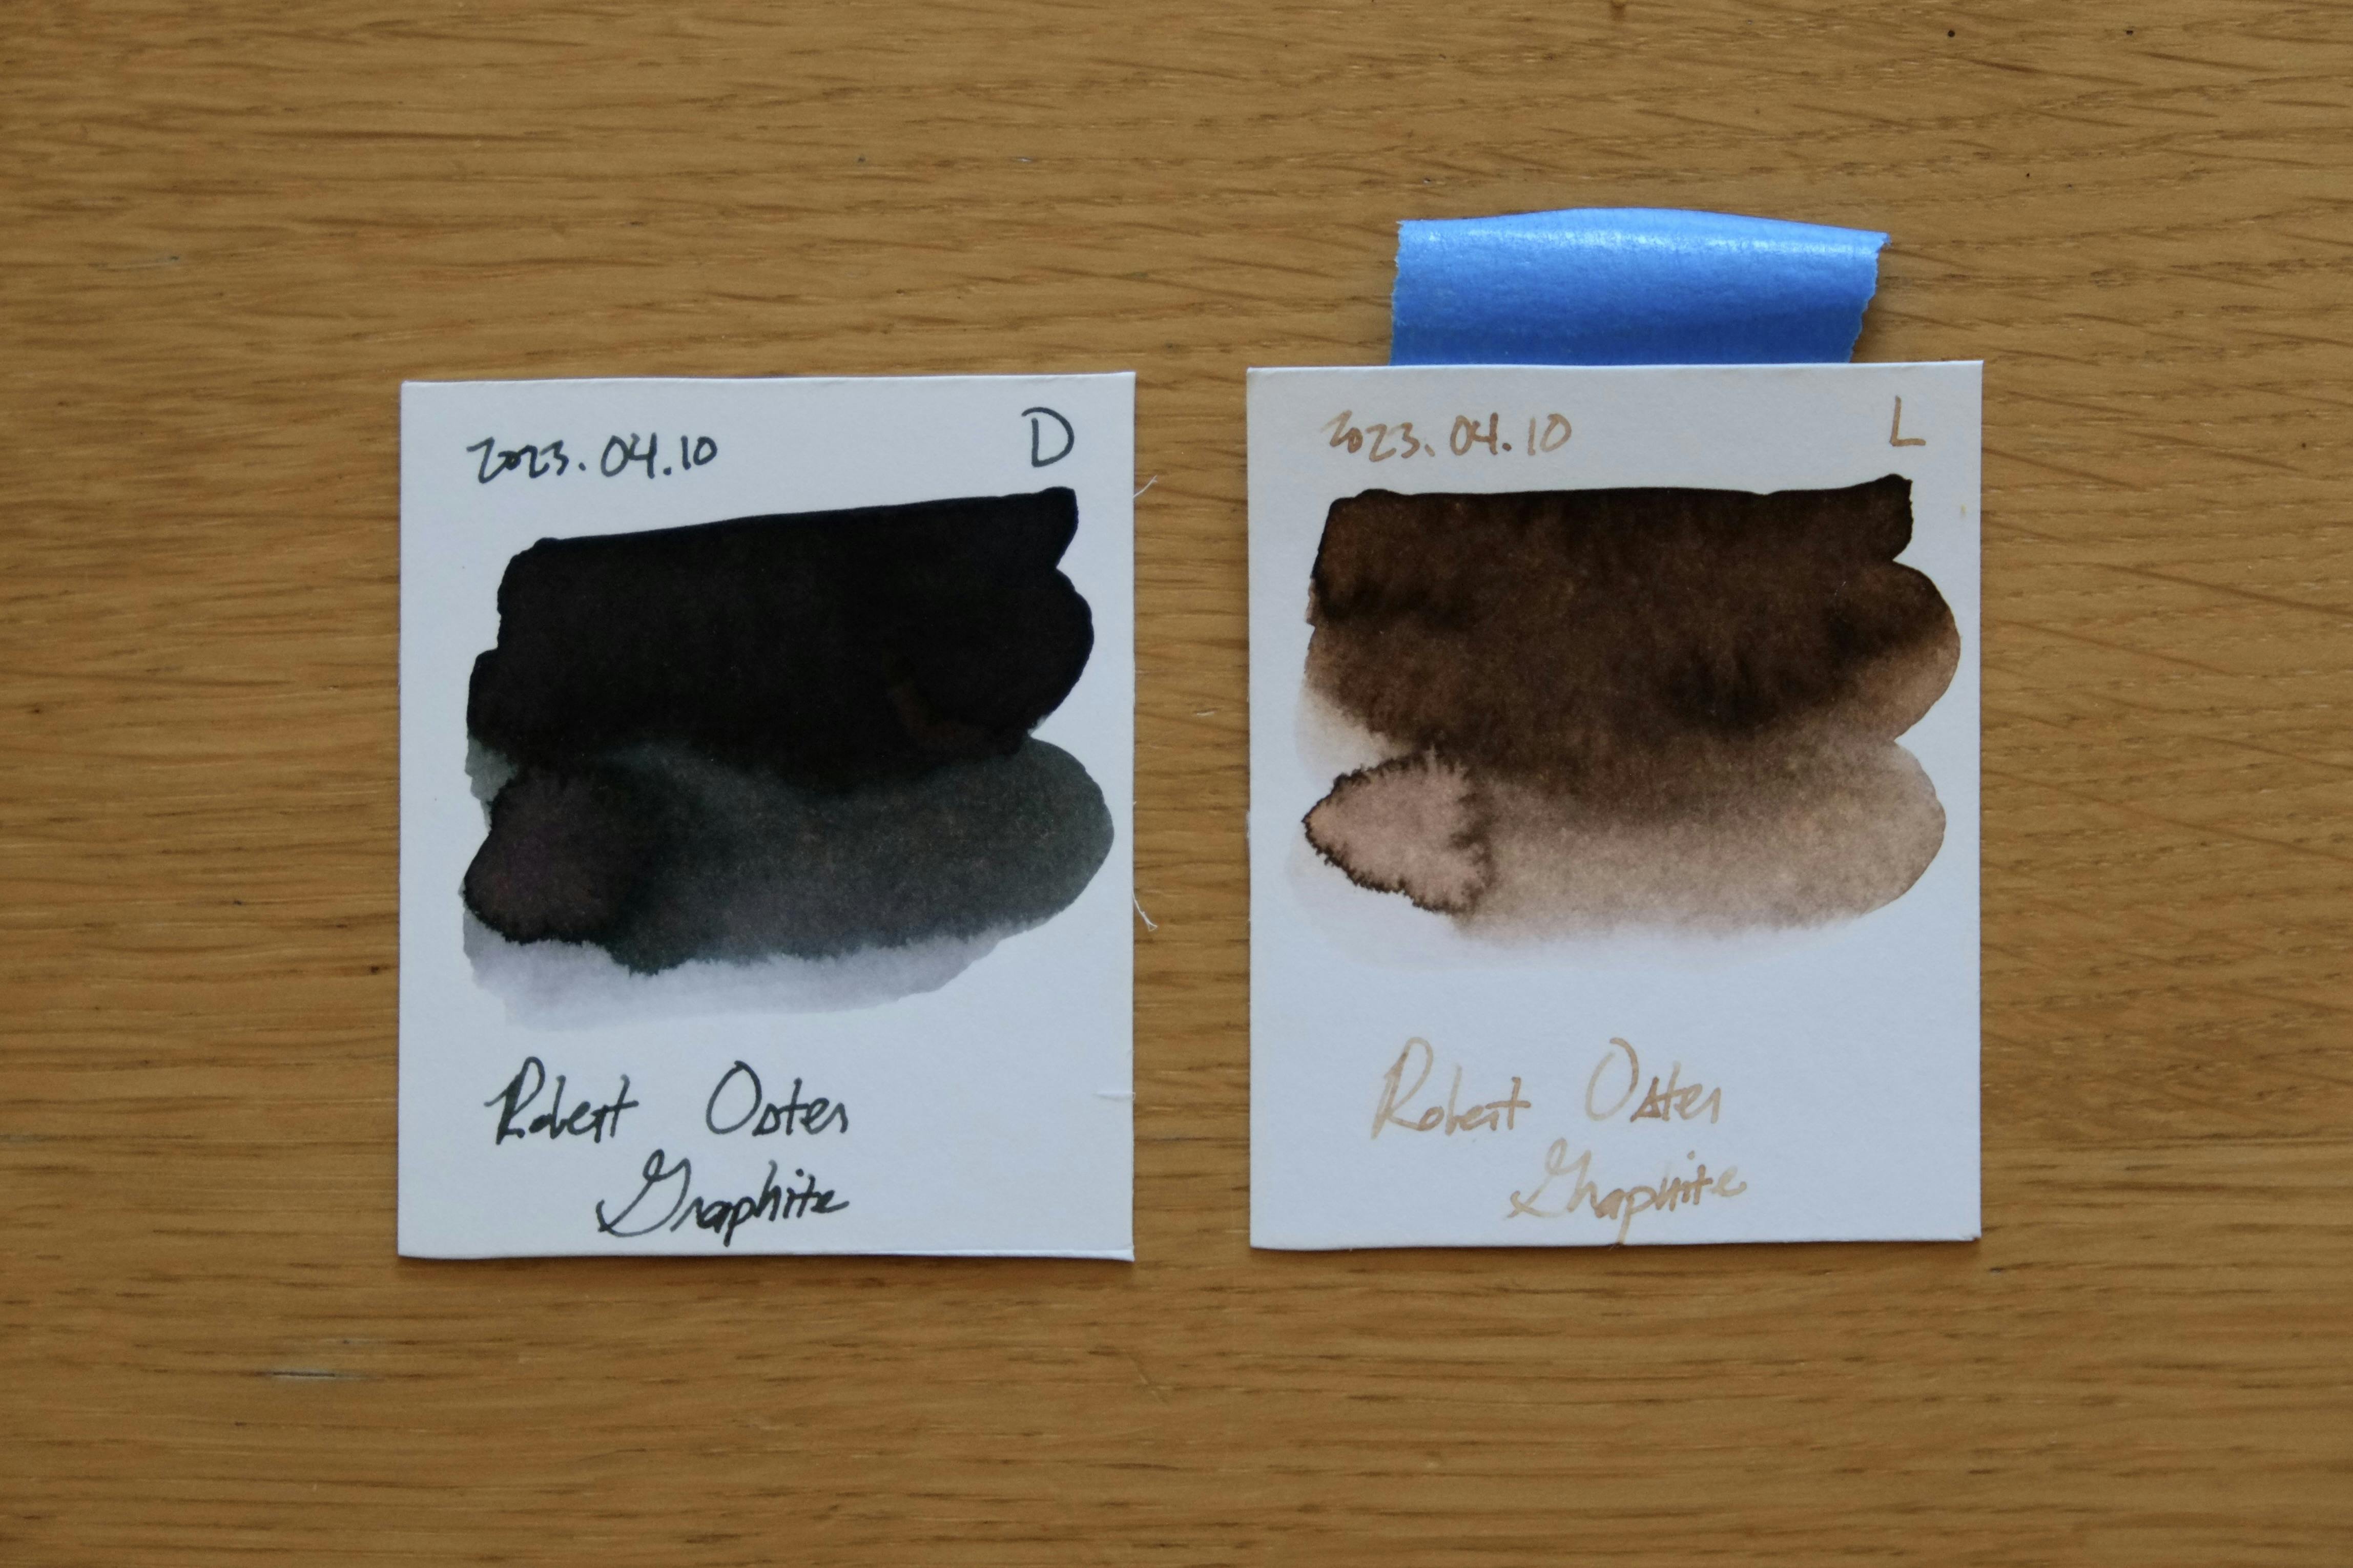 Ink test swatches from August 13, 2023: Robert Oster Graphite